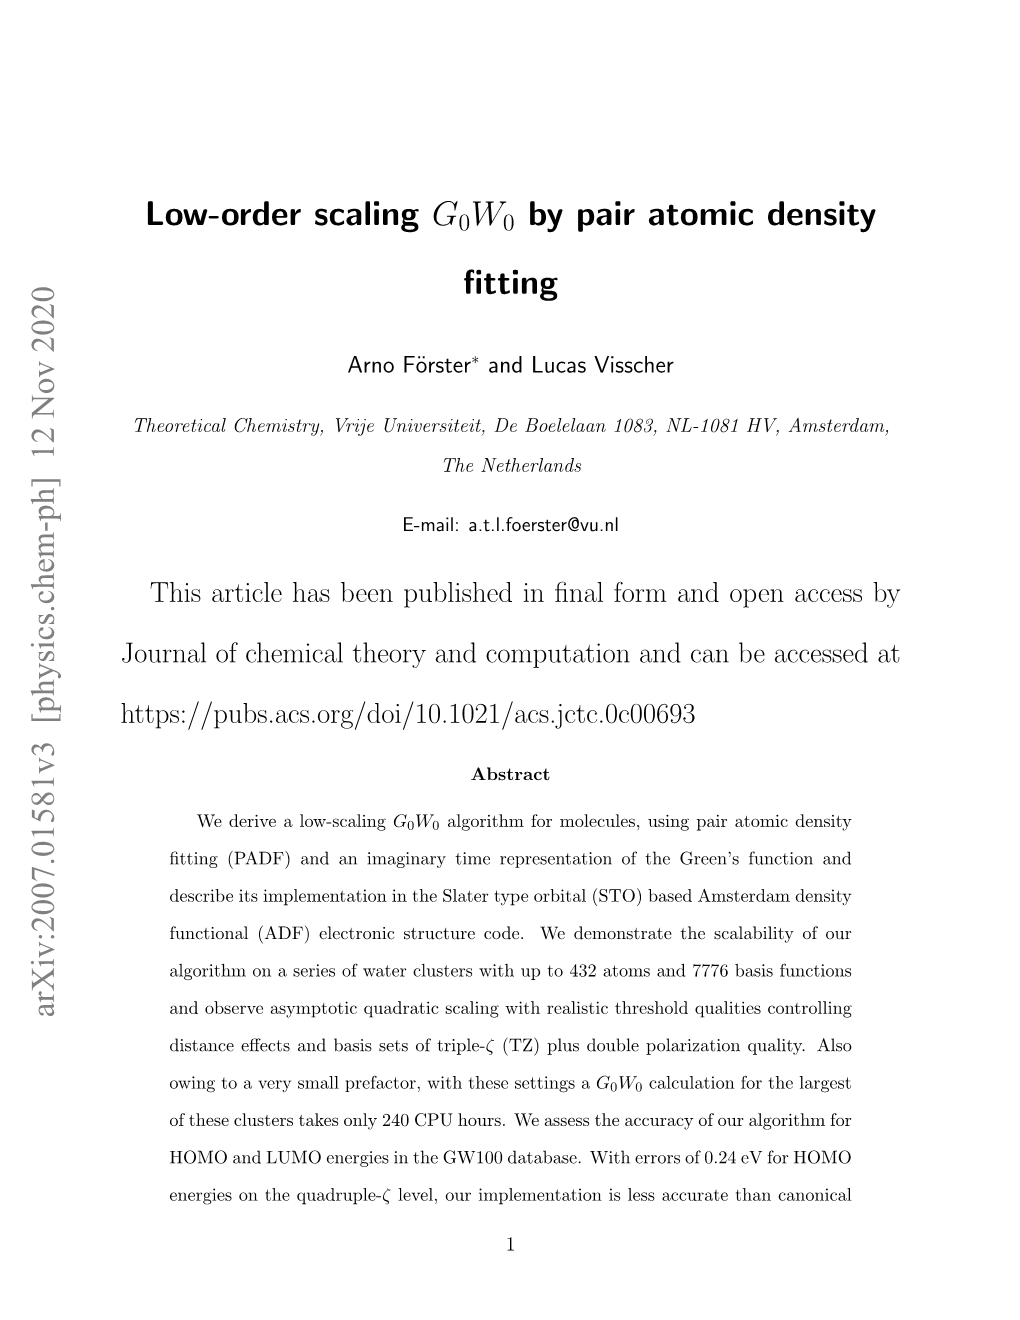 Low-Order Scaling G0W0 by Pair Atomic Density Fitting